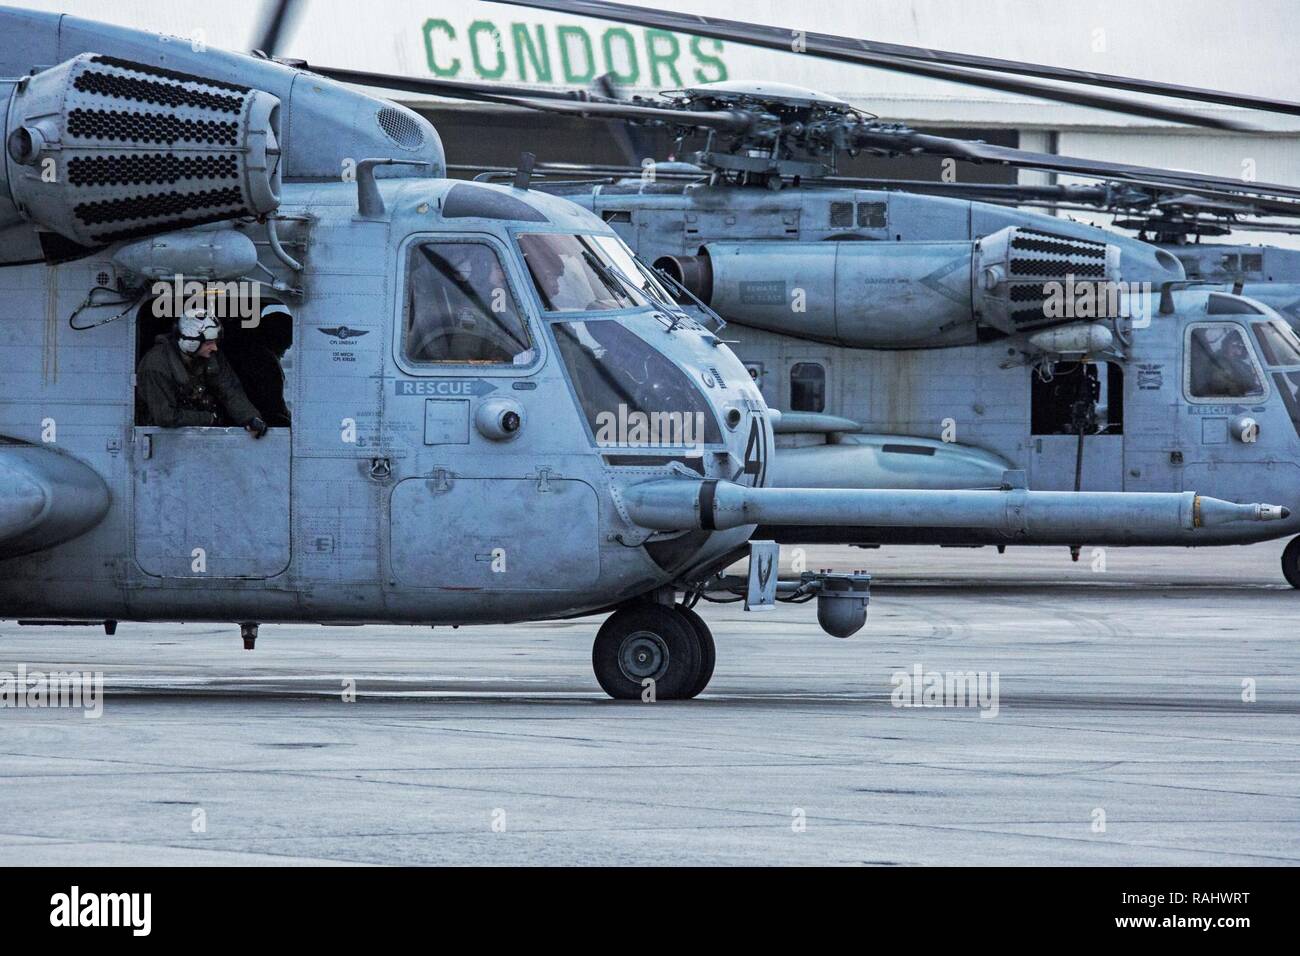 U.S. Marines with Marine Heavy Helicopter Squadron 464 prepare for a “Max Launch”, Marine Corps Air Station New River, N.C., Feb. 3, 2017. The purpose for this flight is to celebrate a rarely achieved maintenance goal of having all aircraft operational at one time. Stock Photo